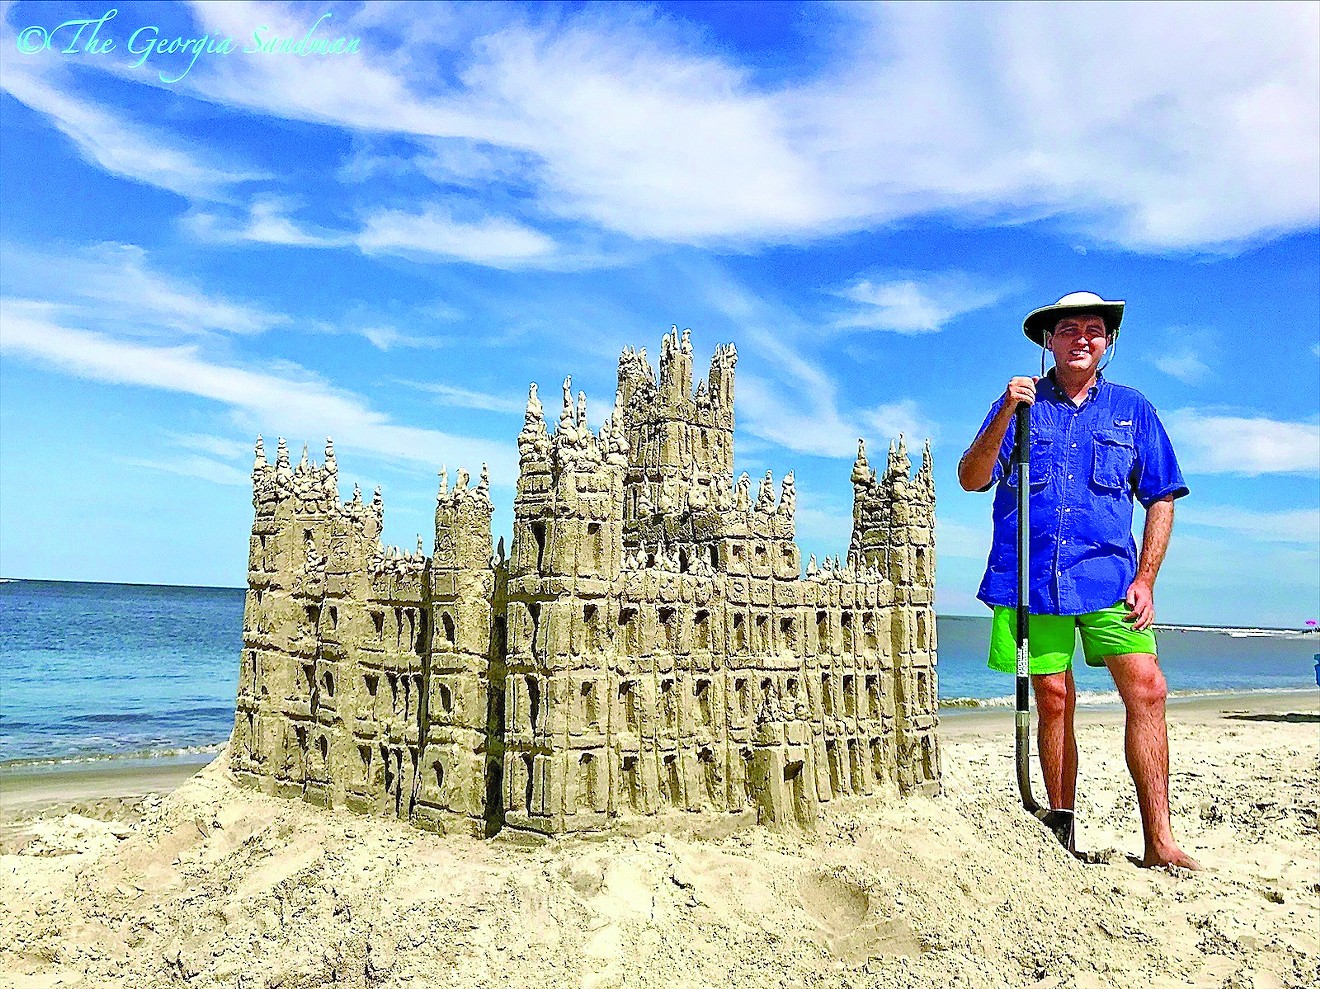 “The Georgia Sandman” Dylan Mulligan poses with one of his favorite sand-builds, Highclere Castle, the famous dwelling from the hit television program “Downtown Abbey.”